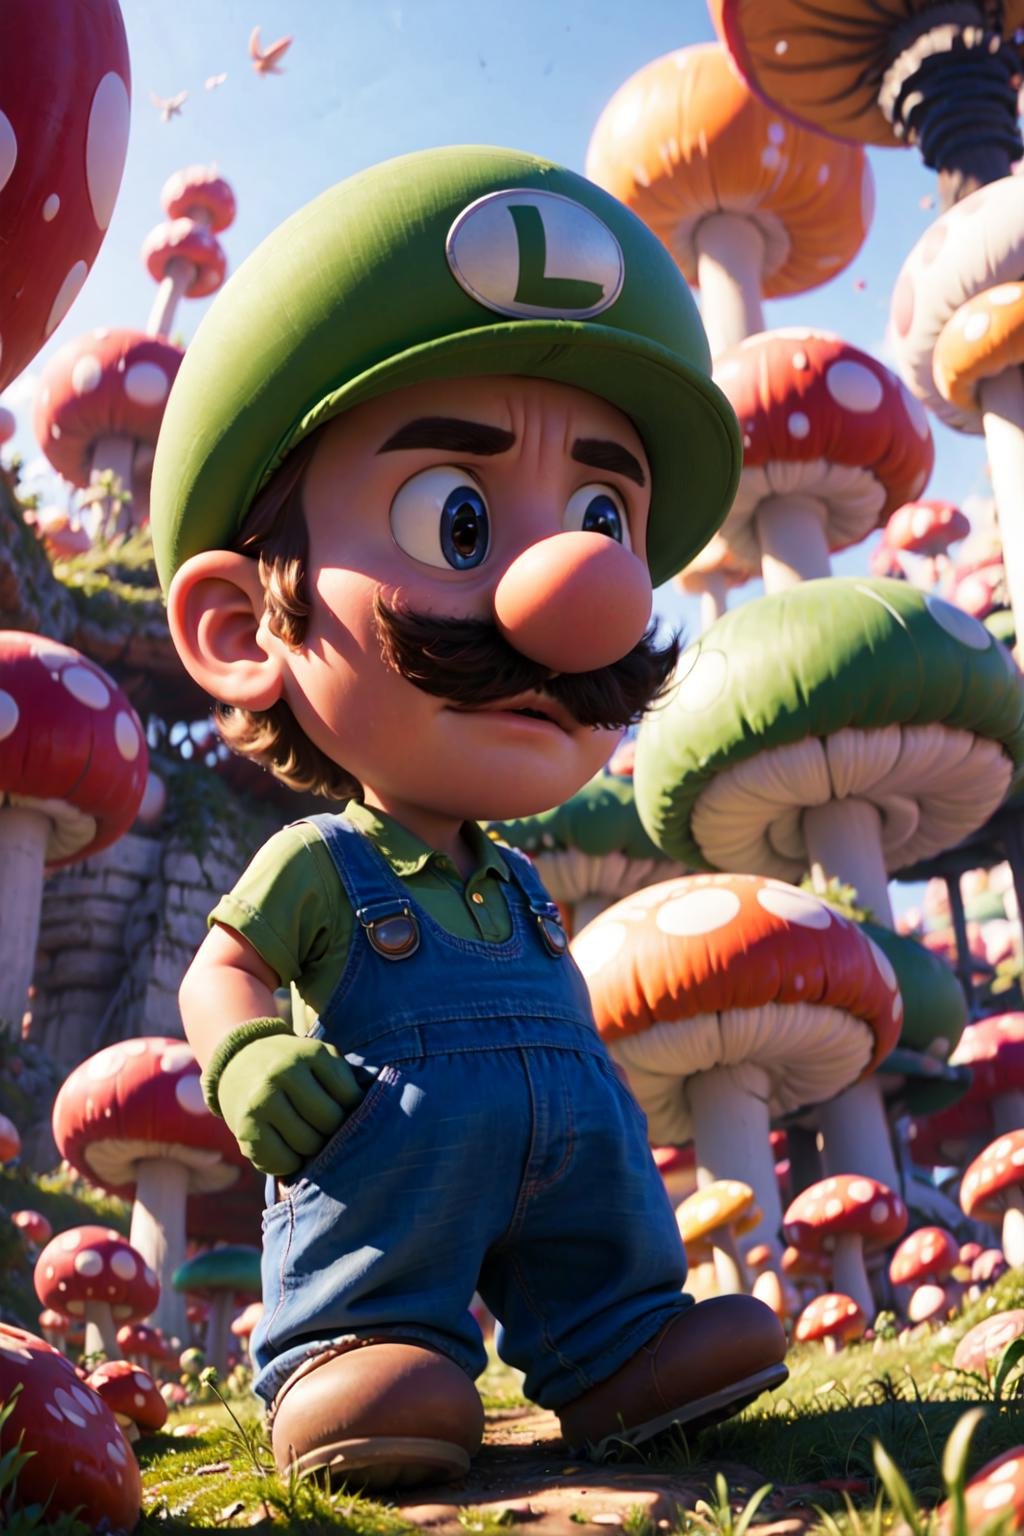 <lyco:SM(120R):1.0> A portrait of Luigi inside a mushroom forest in the style of SM